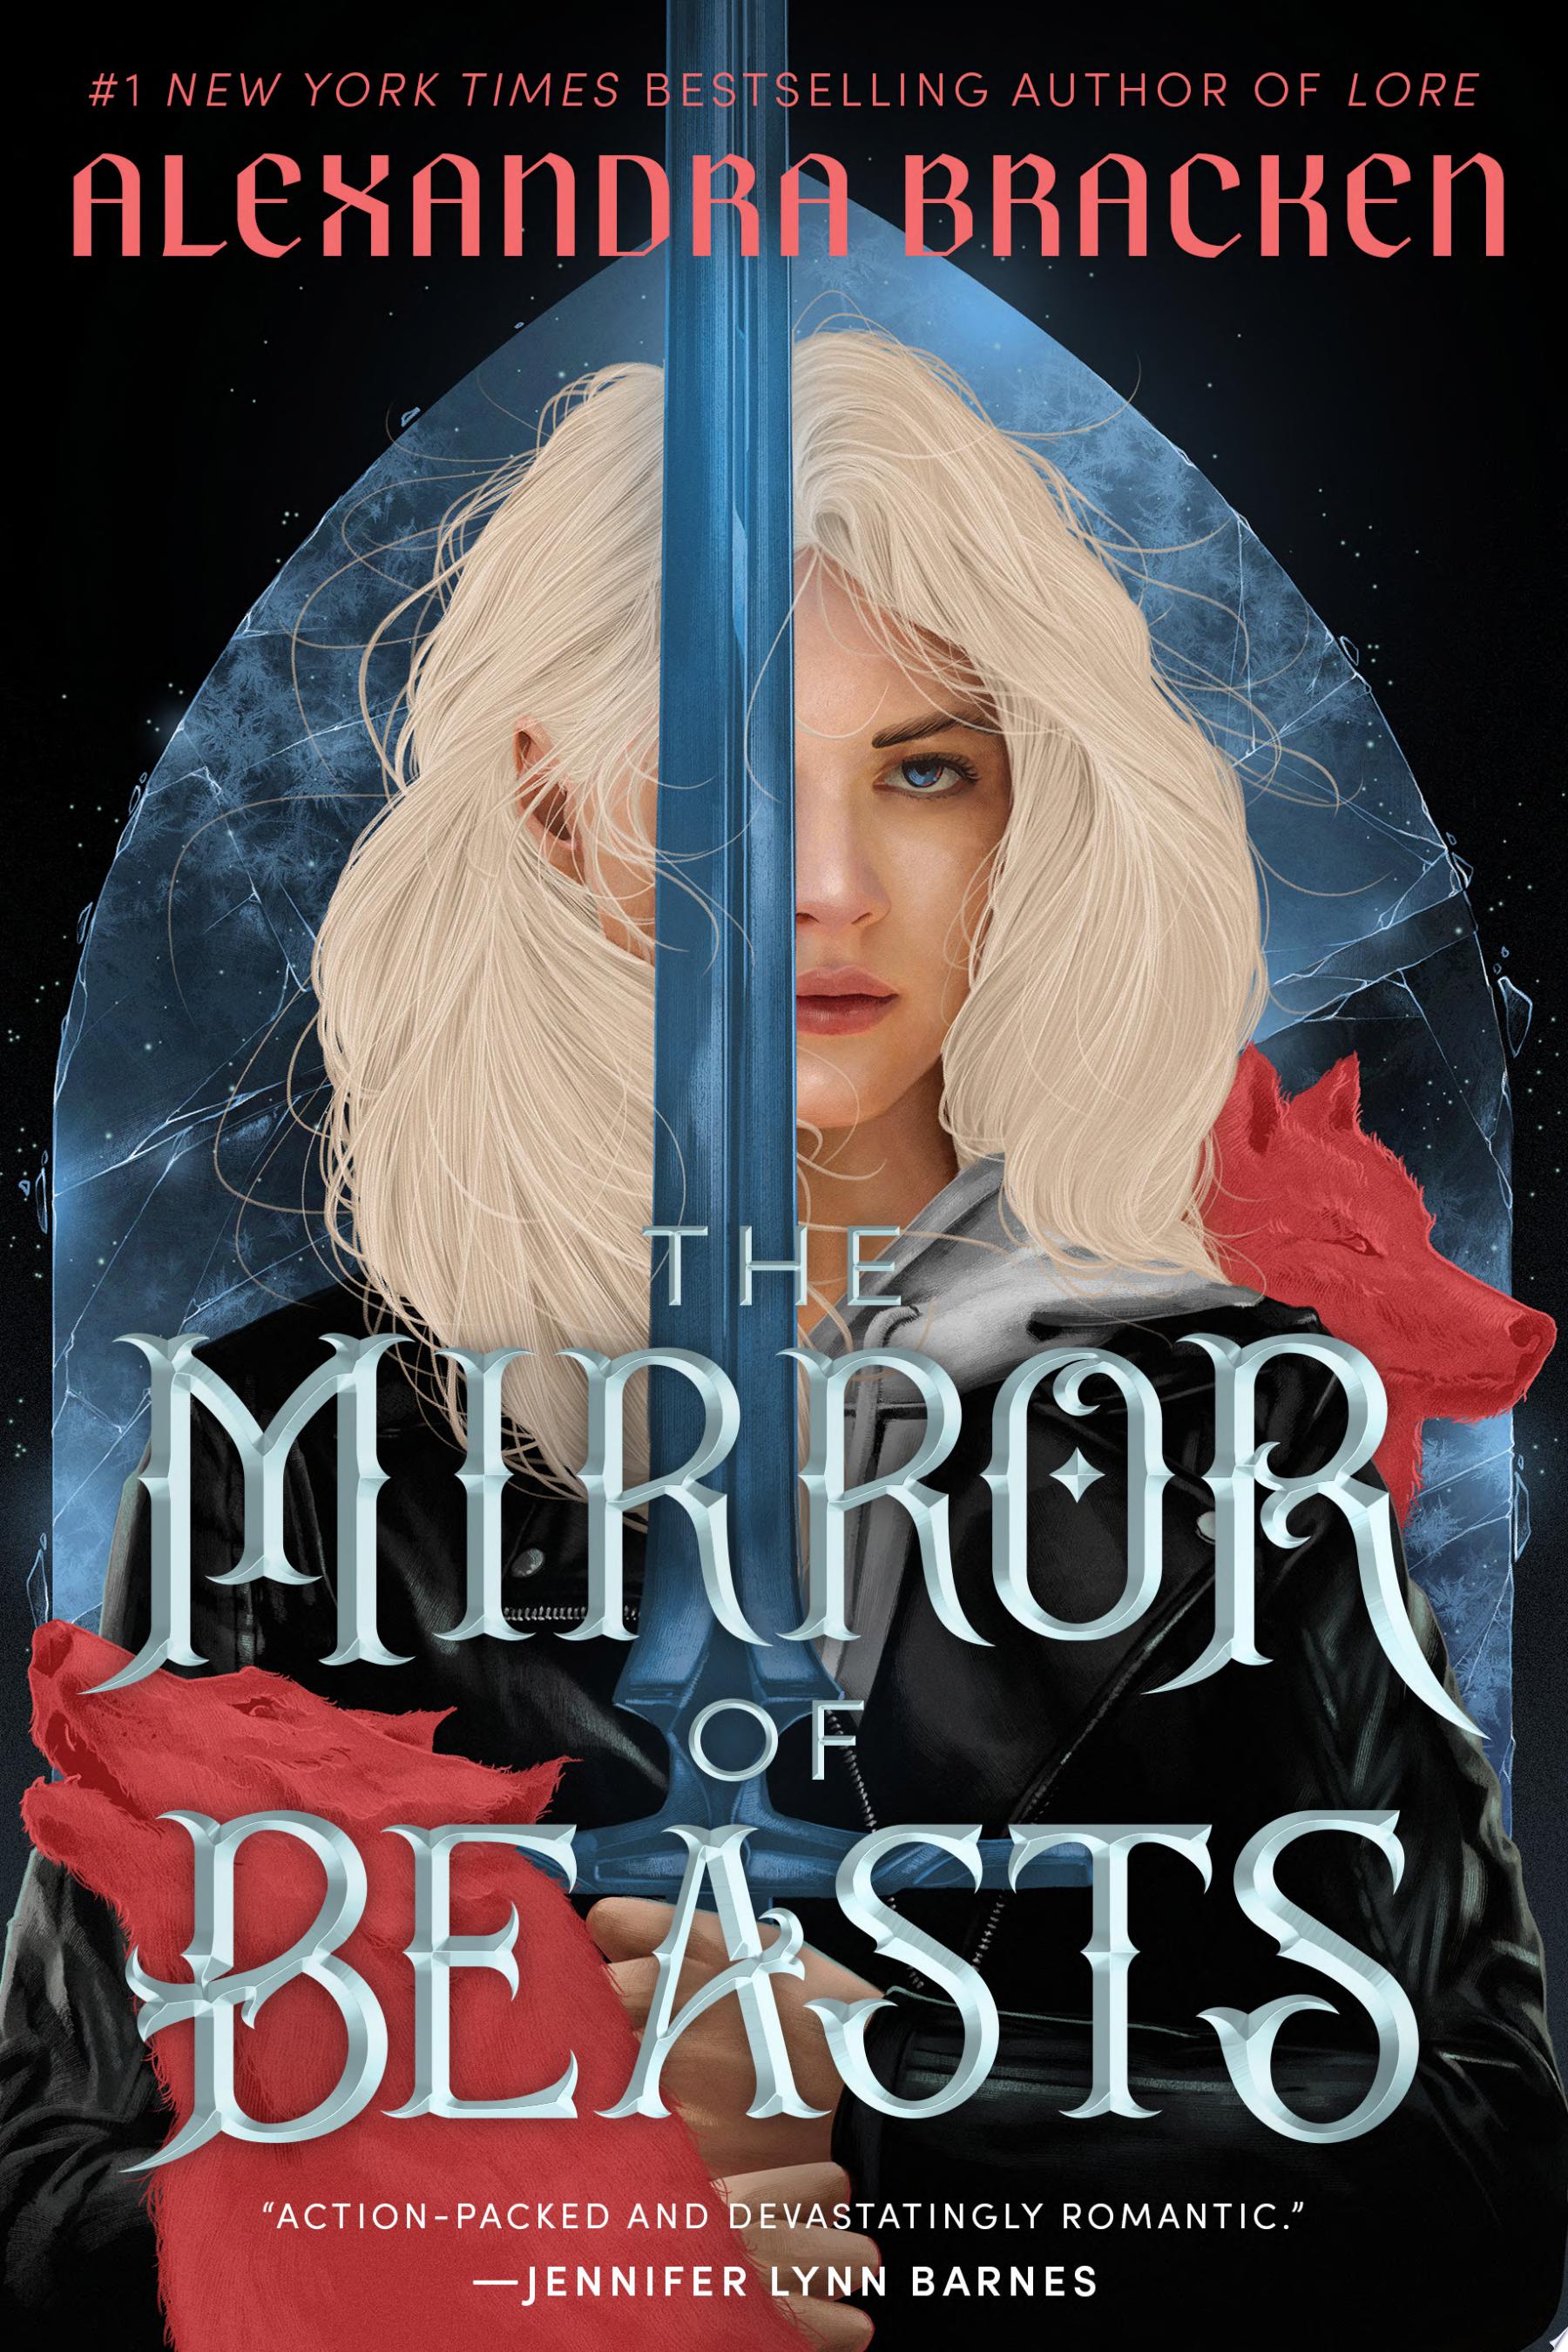 Image for "The Mirror of Beasts"